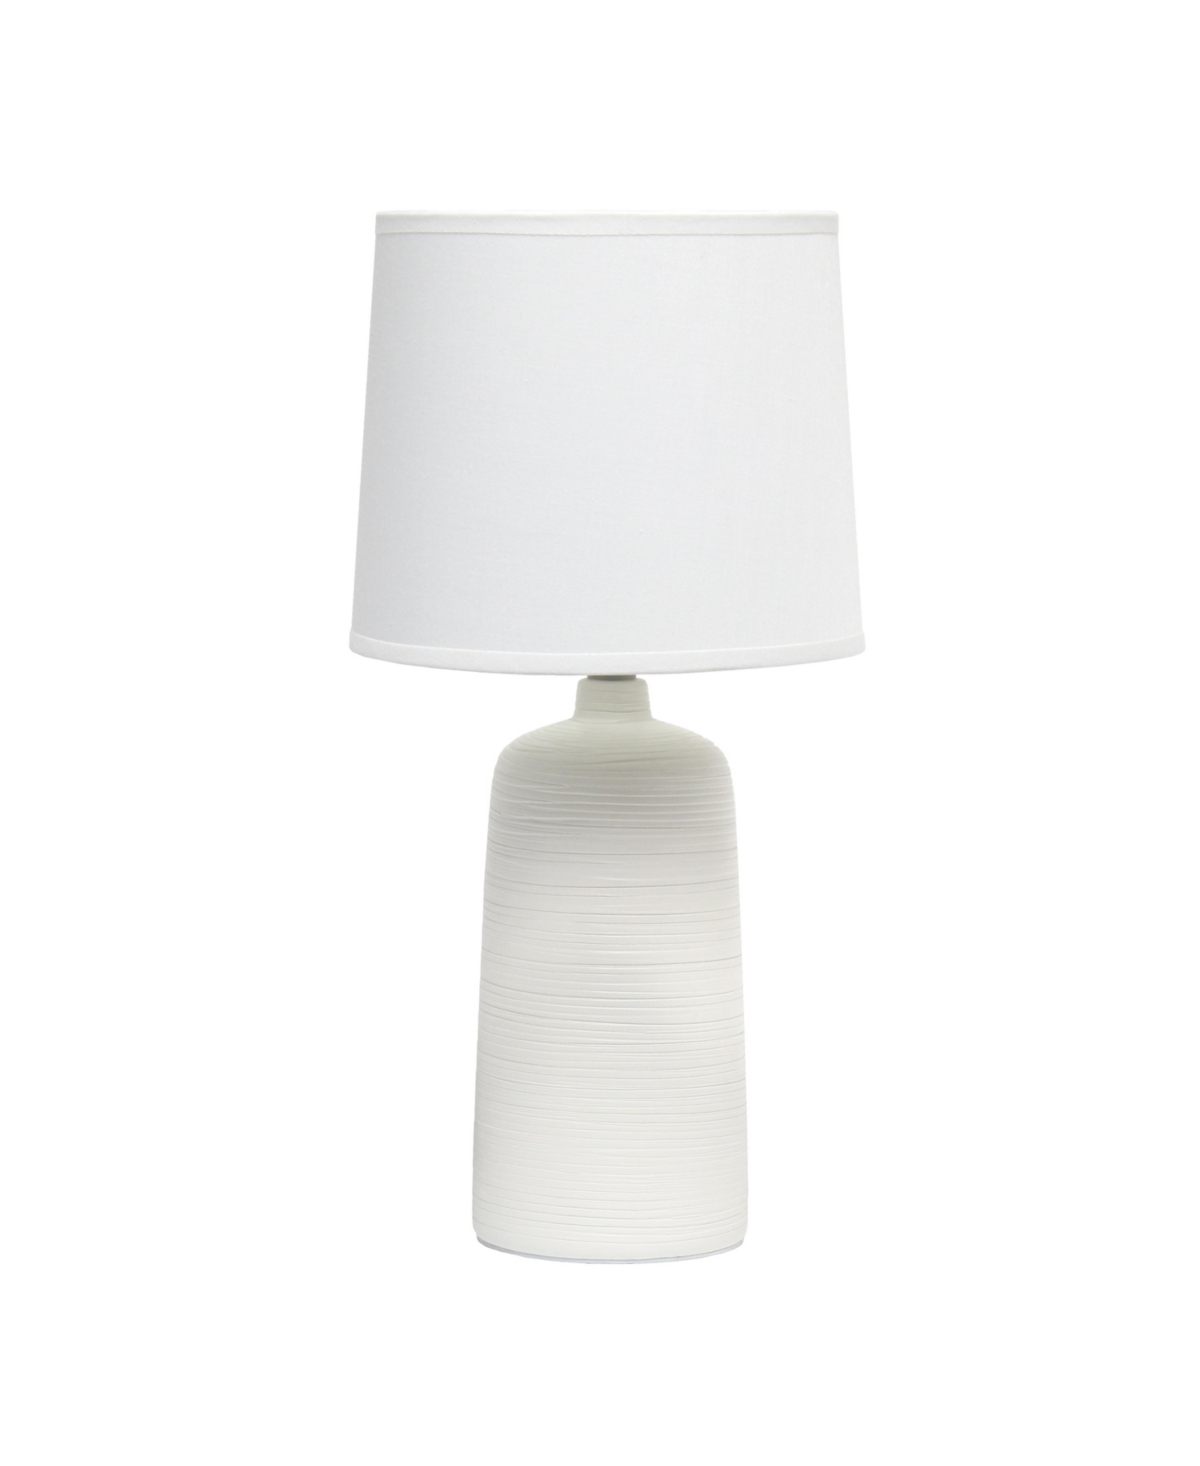 Simple Designs Textured Linear Table Lamp In White With Off White Shade